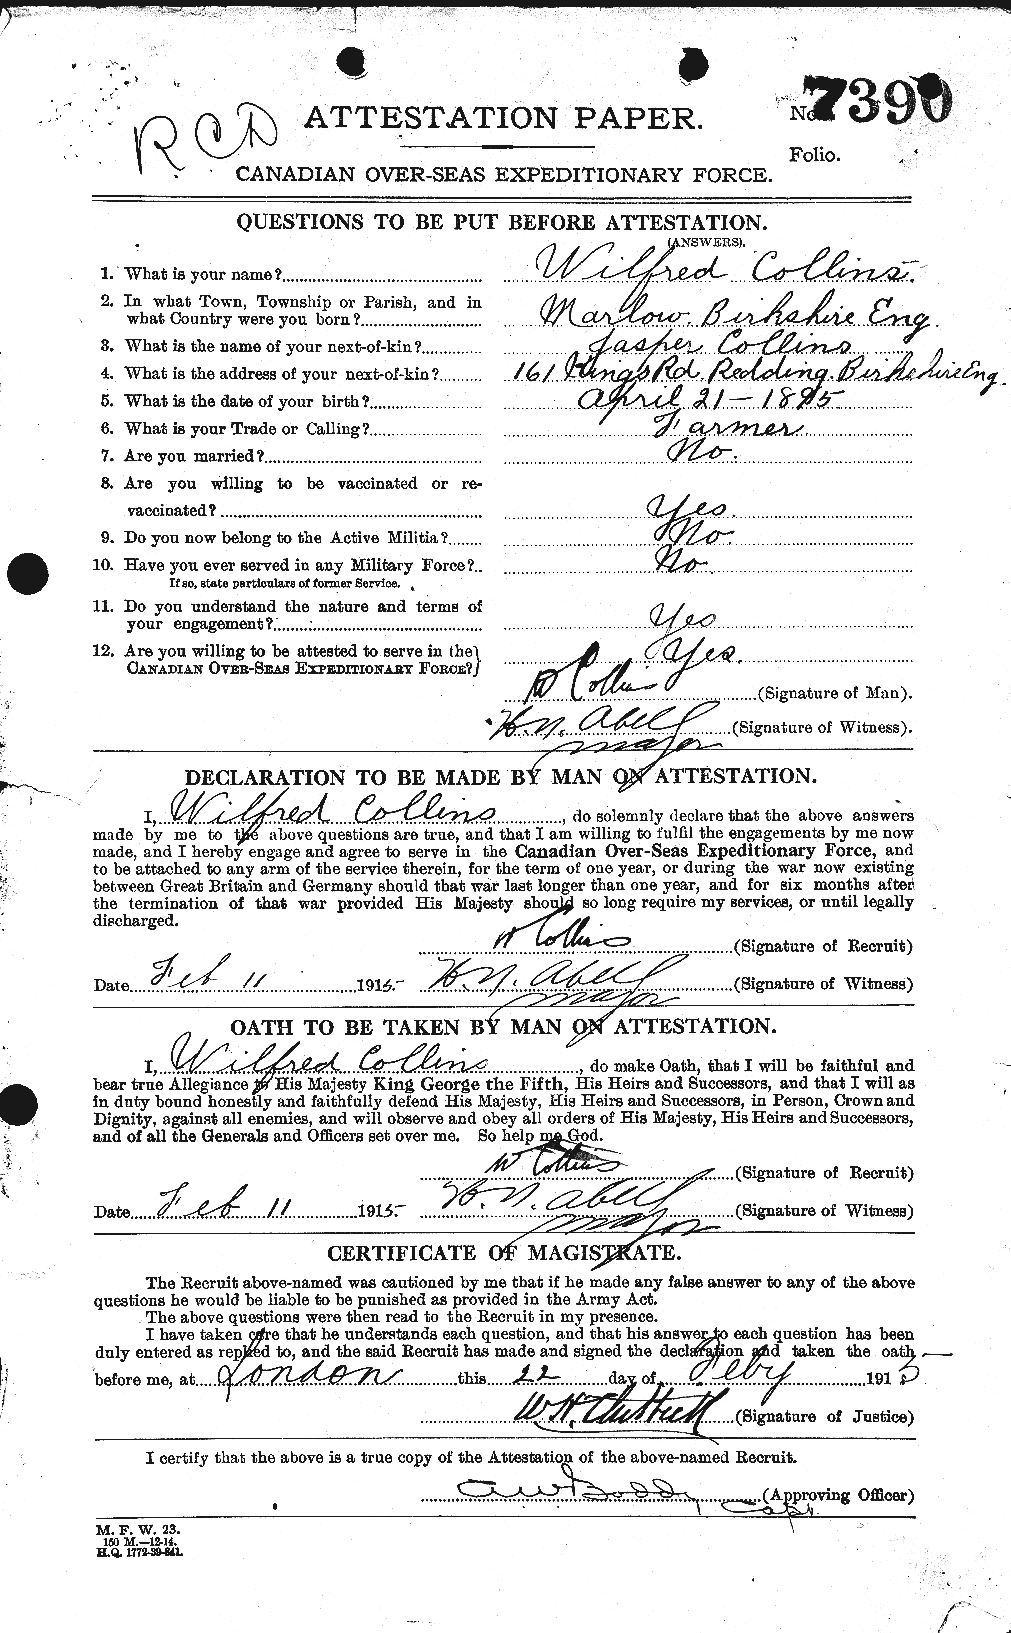 Personnel Records of the First World War - CEF 068829a